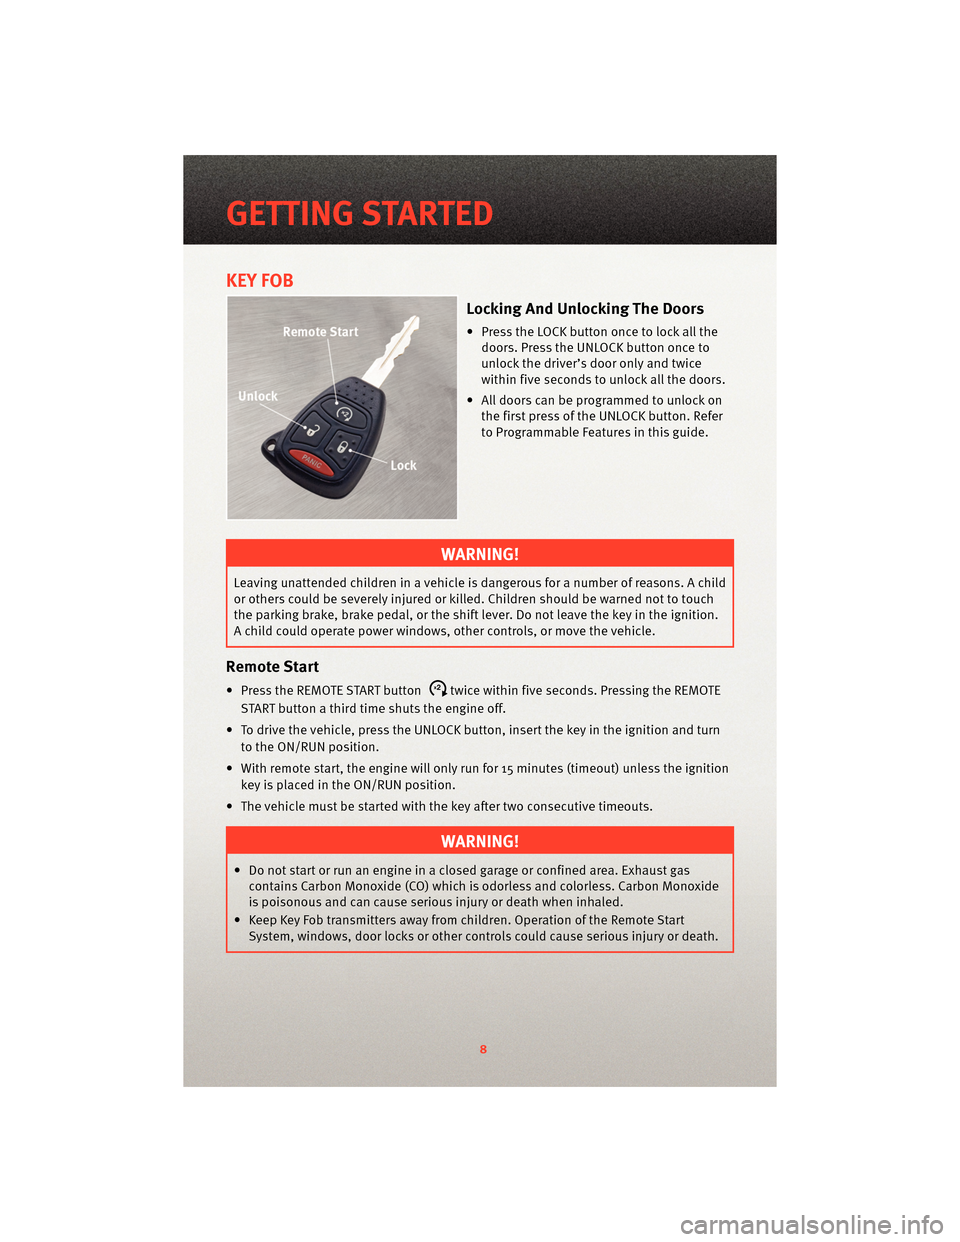 DODGE DAKOTA 2010 3.G User Guide KEY FOB
Locking And Unlocking The Doors
• Press the LOCK button once to lock all thedoors. Press the UNLOCK button once to
unlock the driver’s door only and twice
within five seconds to unlock all